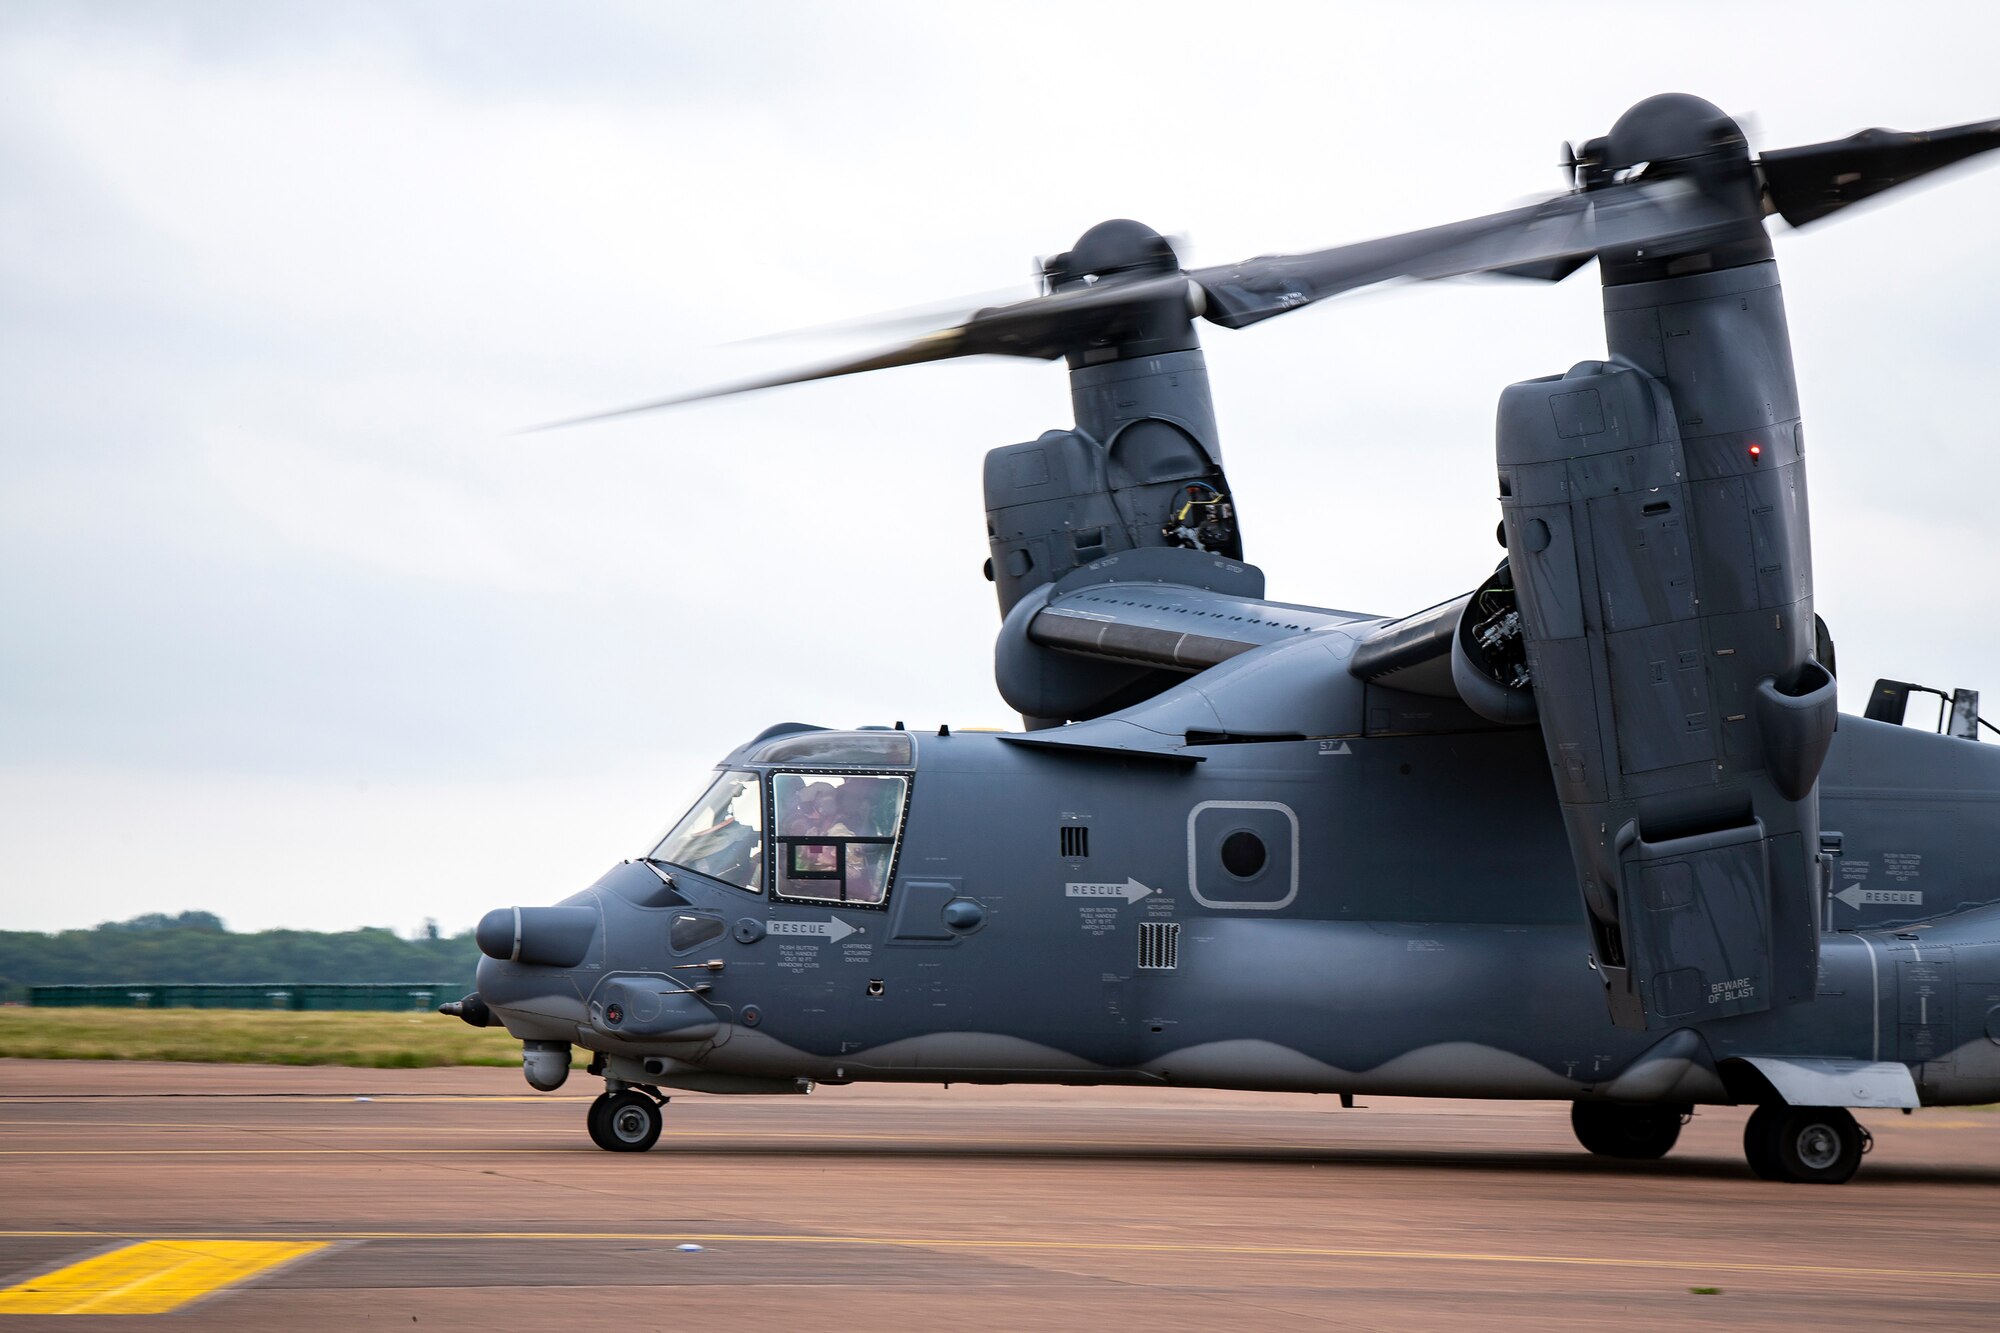 A CV-22A Osprey assigned to the 352d Special Operations Wing taxis on the flightline during an Agile Combat Employment exercise at RAF Fairford, England, Sept. 13, 2021. The exercise enables U.S. forces in Europe to operate from locations with varying levels of capacity and support. This further ensures Airmen and aircrews are postured to deliver lethal combat power across the full spectrum of military operations. (U.S. Air Force photo by Senior Airman Eugene Oliver)